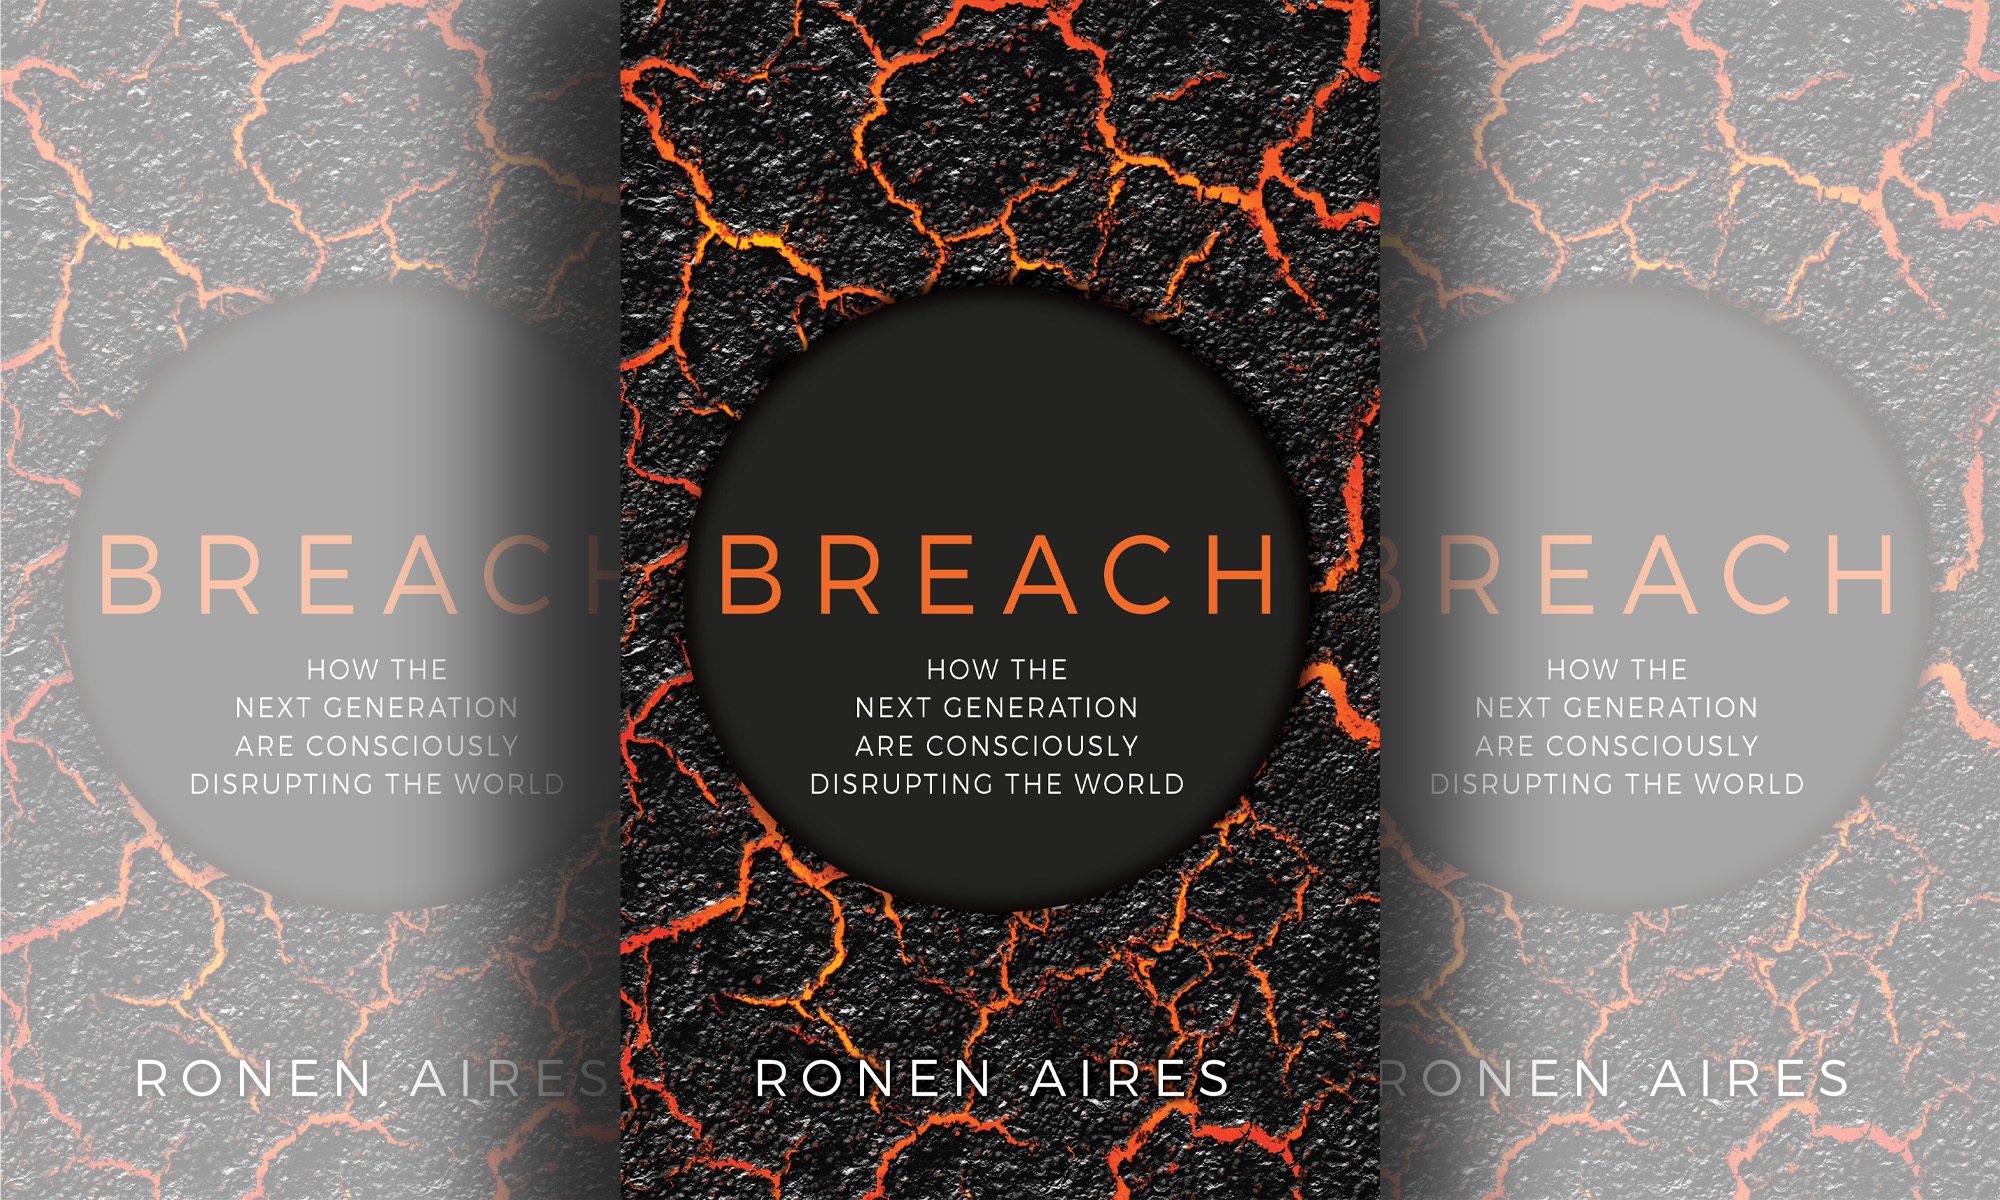 'Breach' by Ronen Aires book cover. Image: Supplied